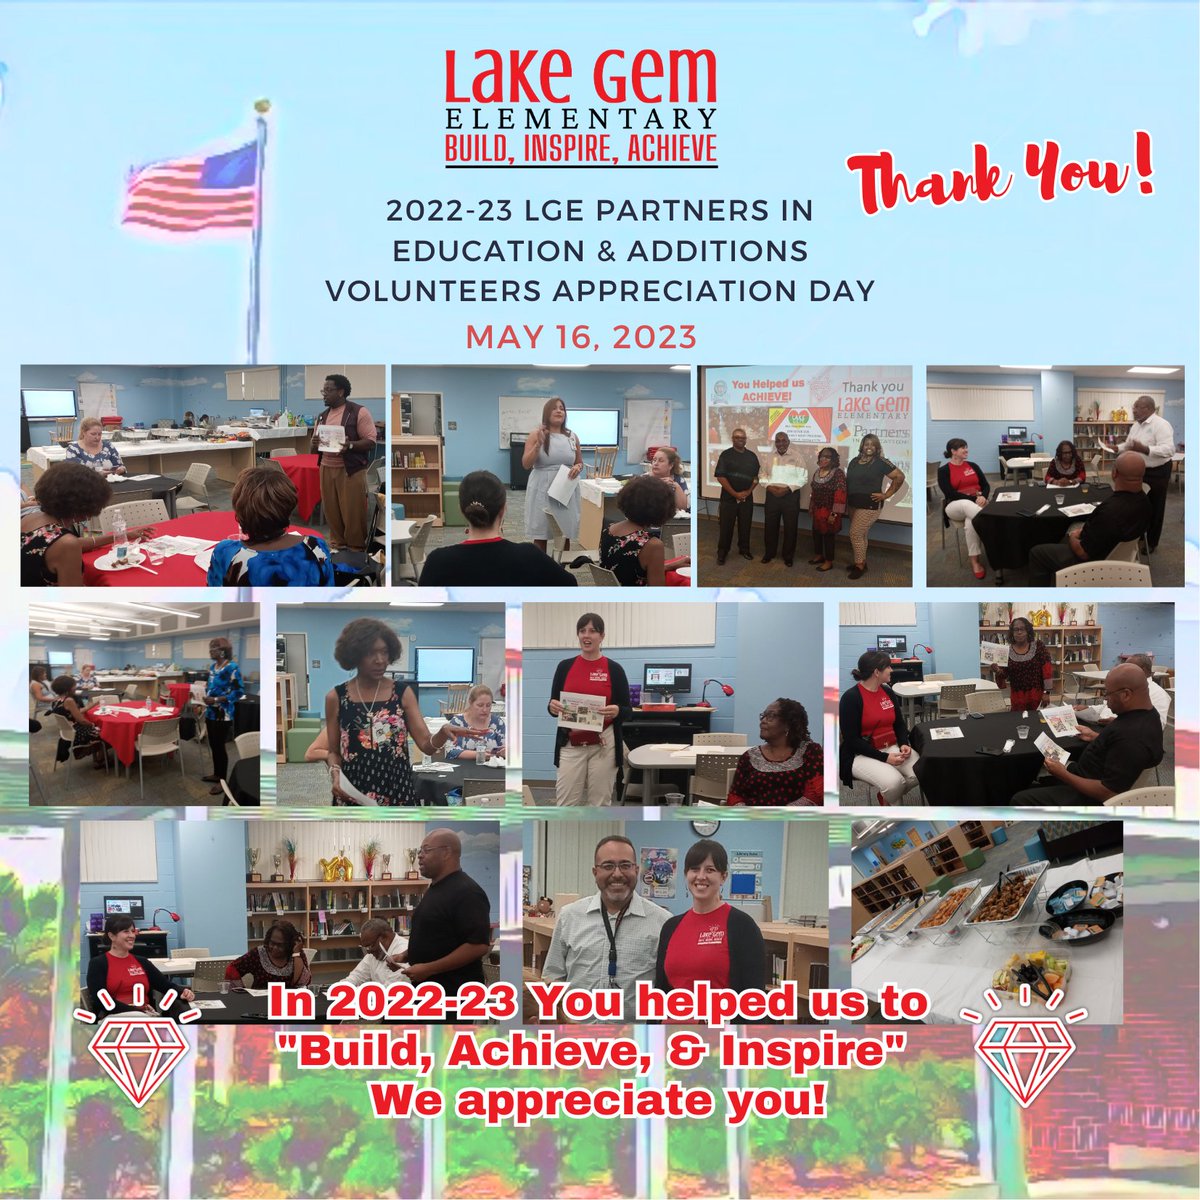 Thank you @LakeGemES_OCPS Community & Business Partners in Education and LGE Volunteers, for participating in our 2022-23 LGE Community & Business Partners & School Volunteers' Appreciation Luncheon yesterday!

#BuildInspireAchieve
#lakegemproud
@OCPSnews @OCPS_PFE @Fdn4OCPS